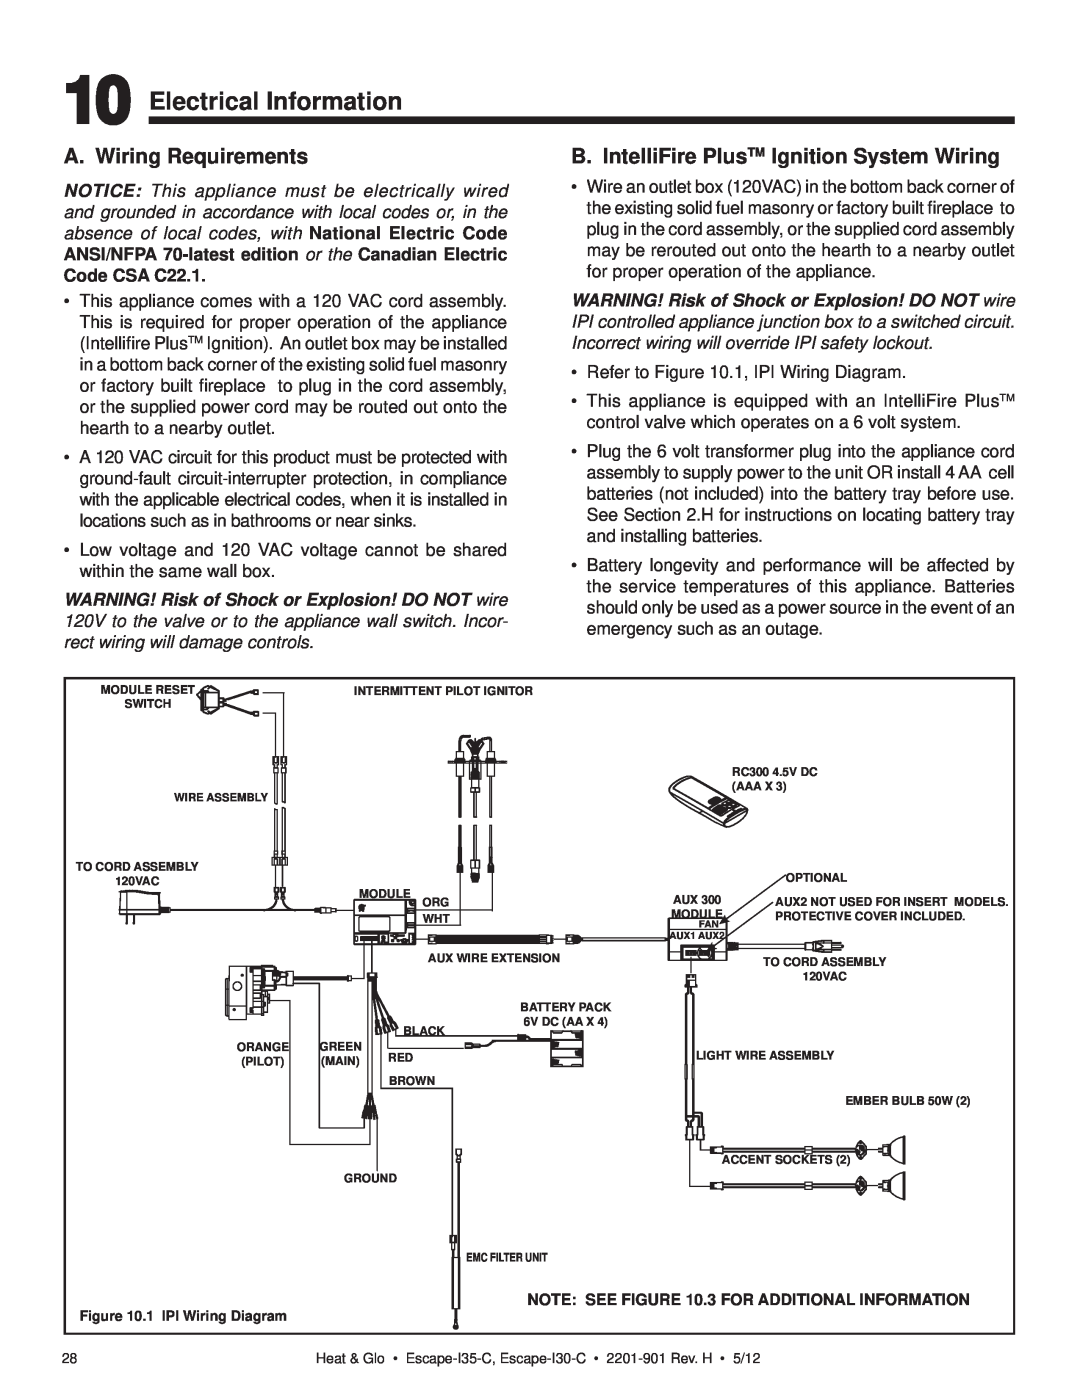 Heat & Glo LifeStyle ESCAPE-I35-C owner manual Electrical Information, A. Wiring Requirements 